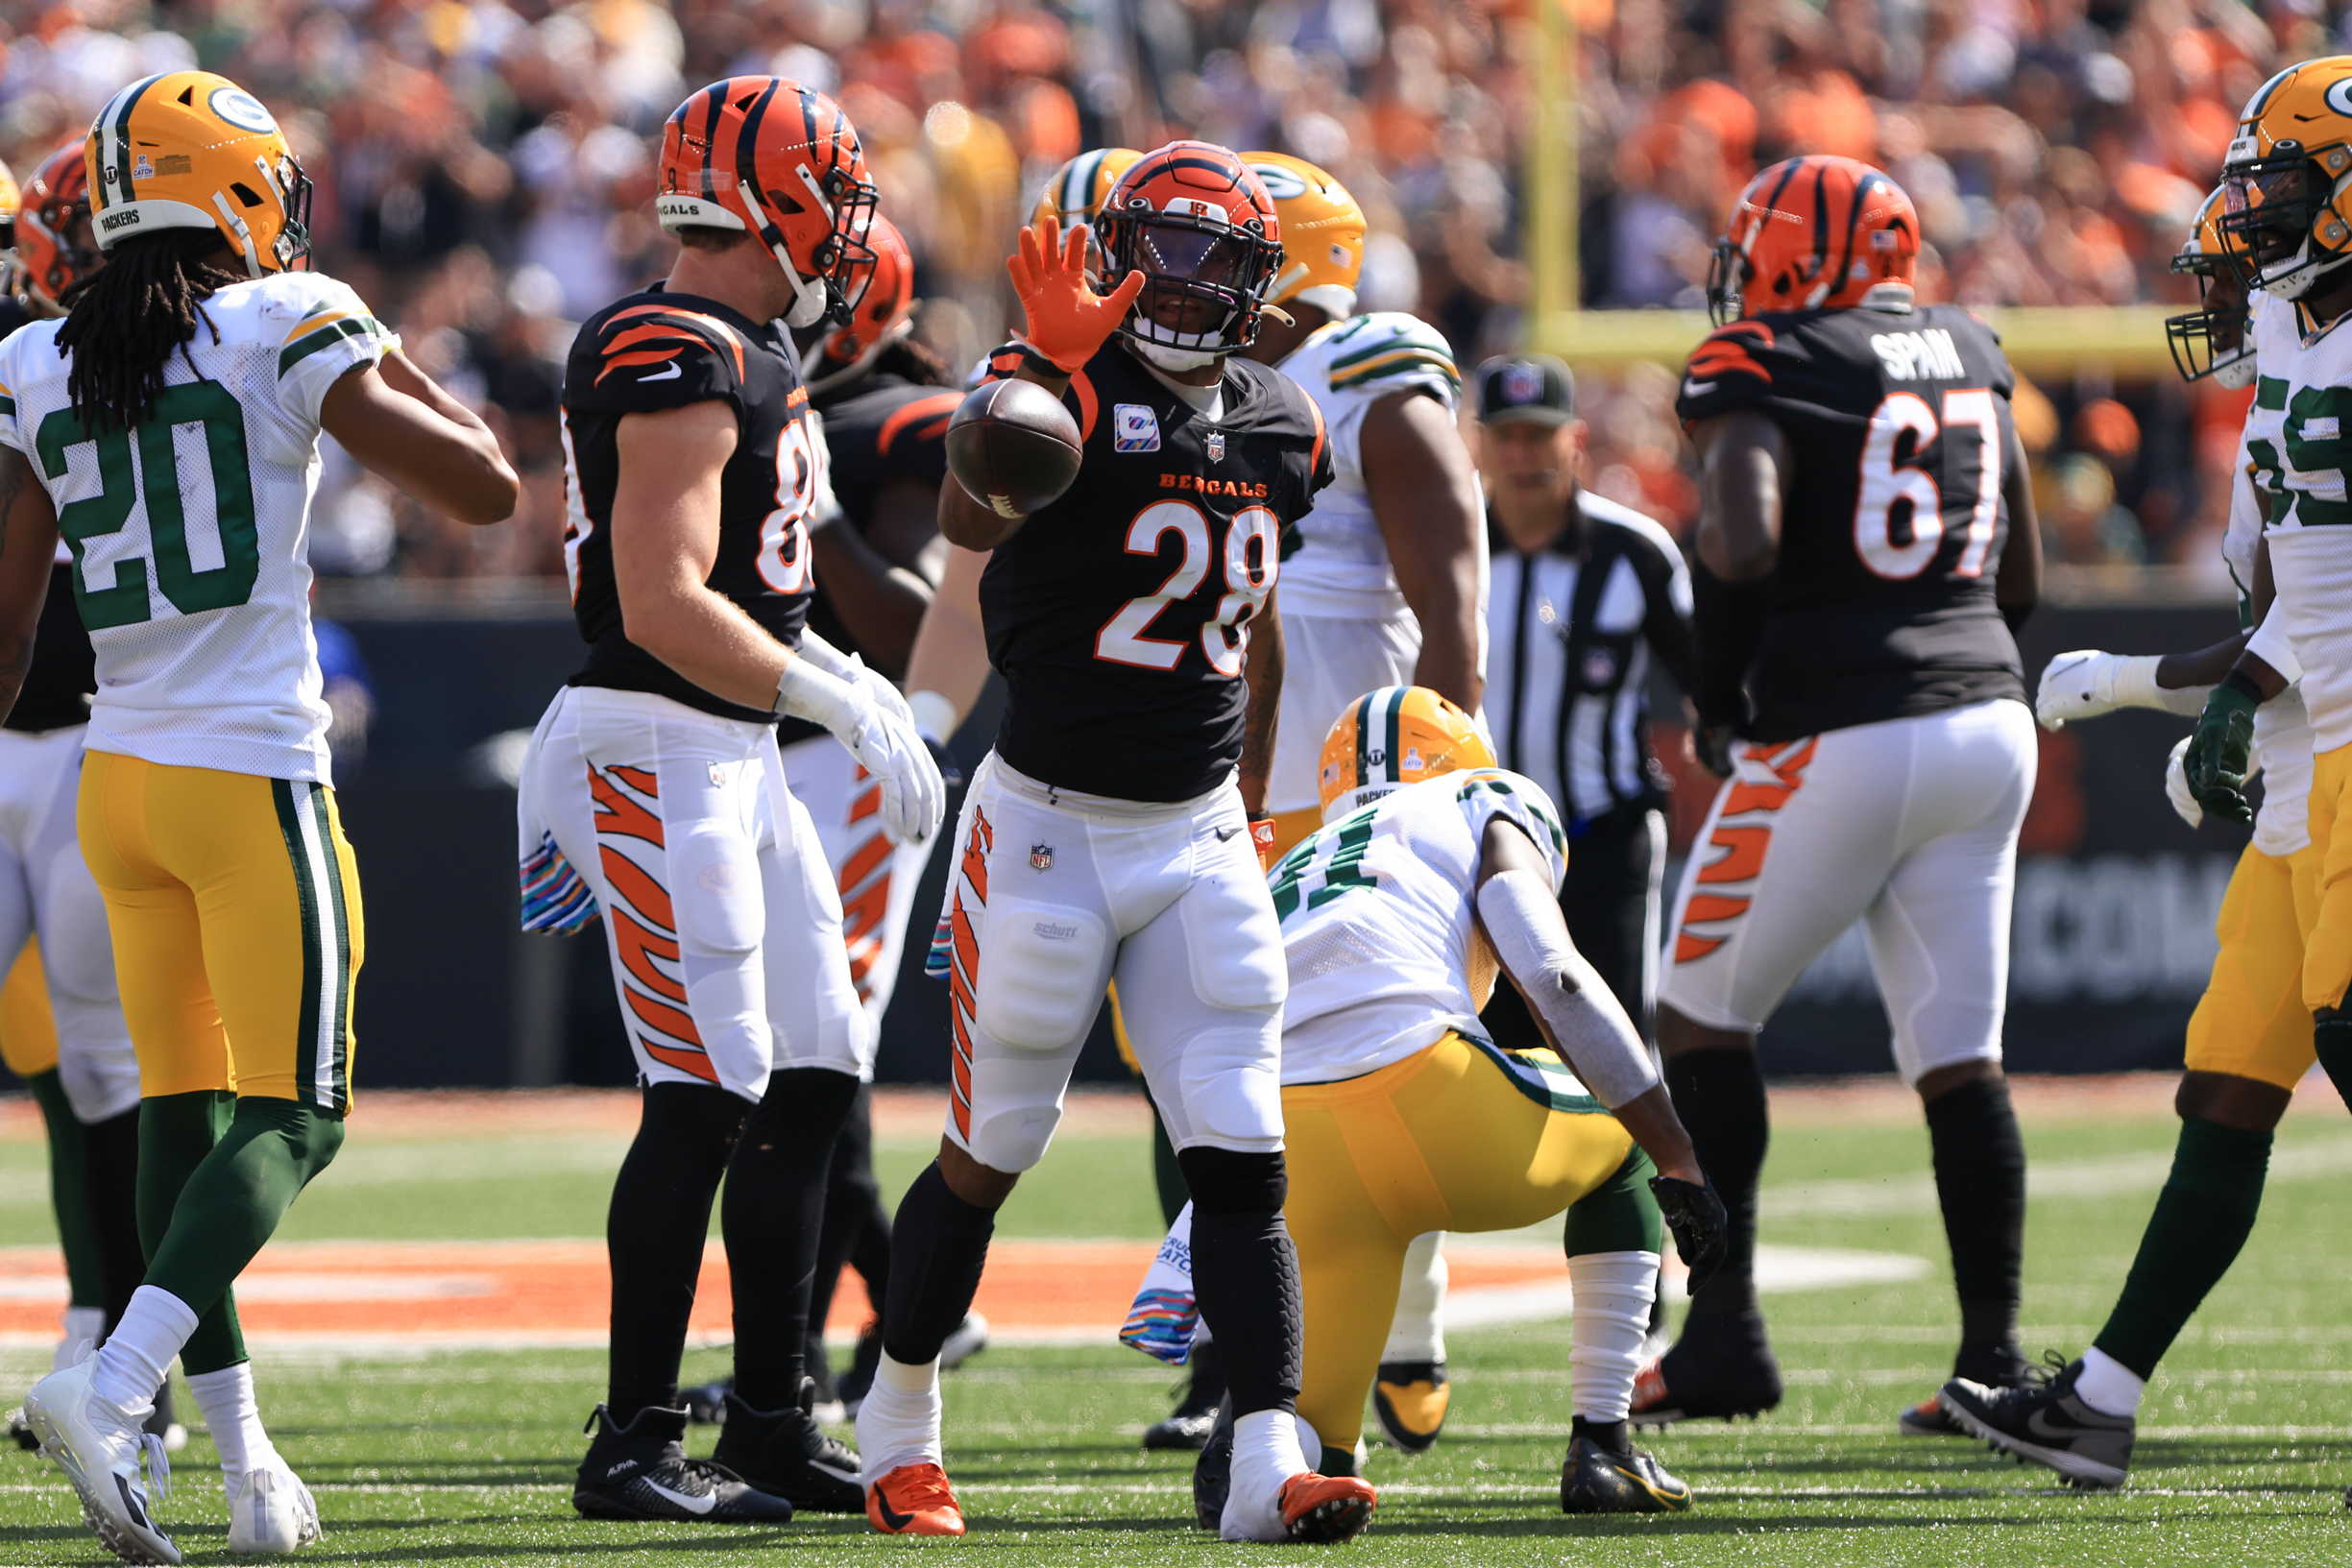 NFL: OCT 10 Packers at Bengals